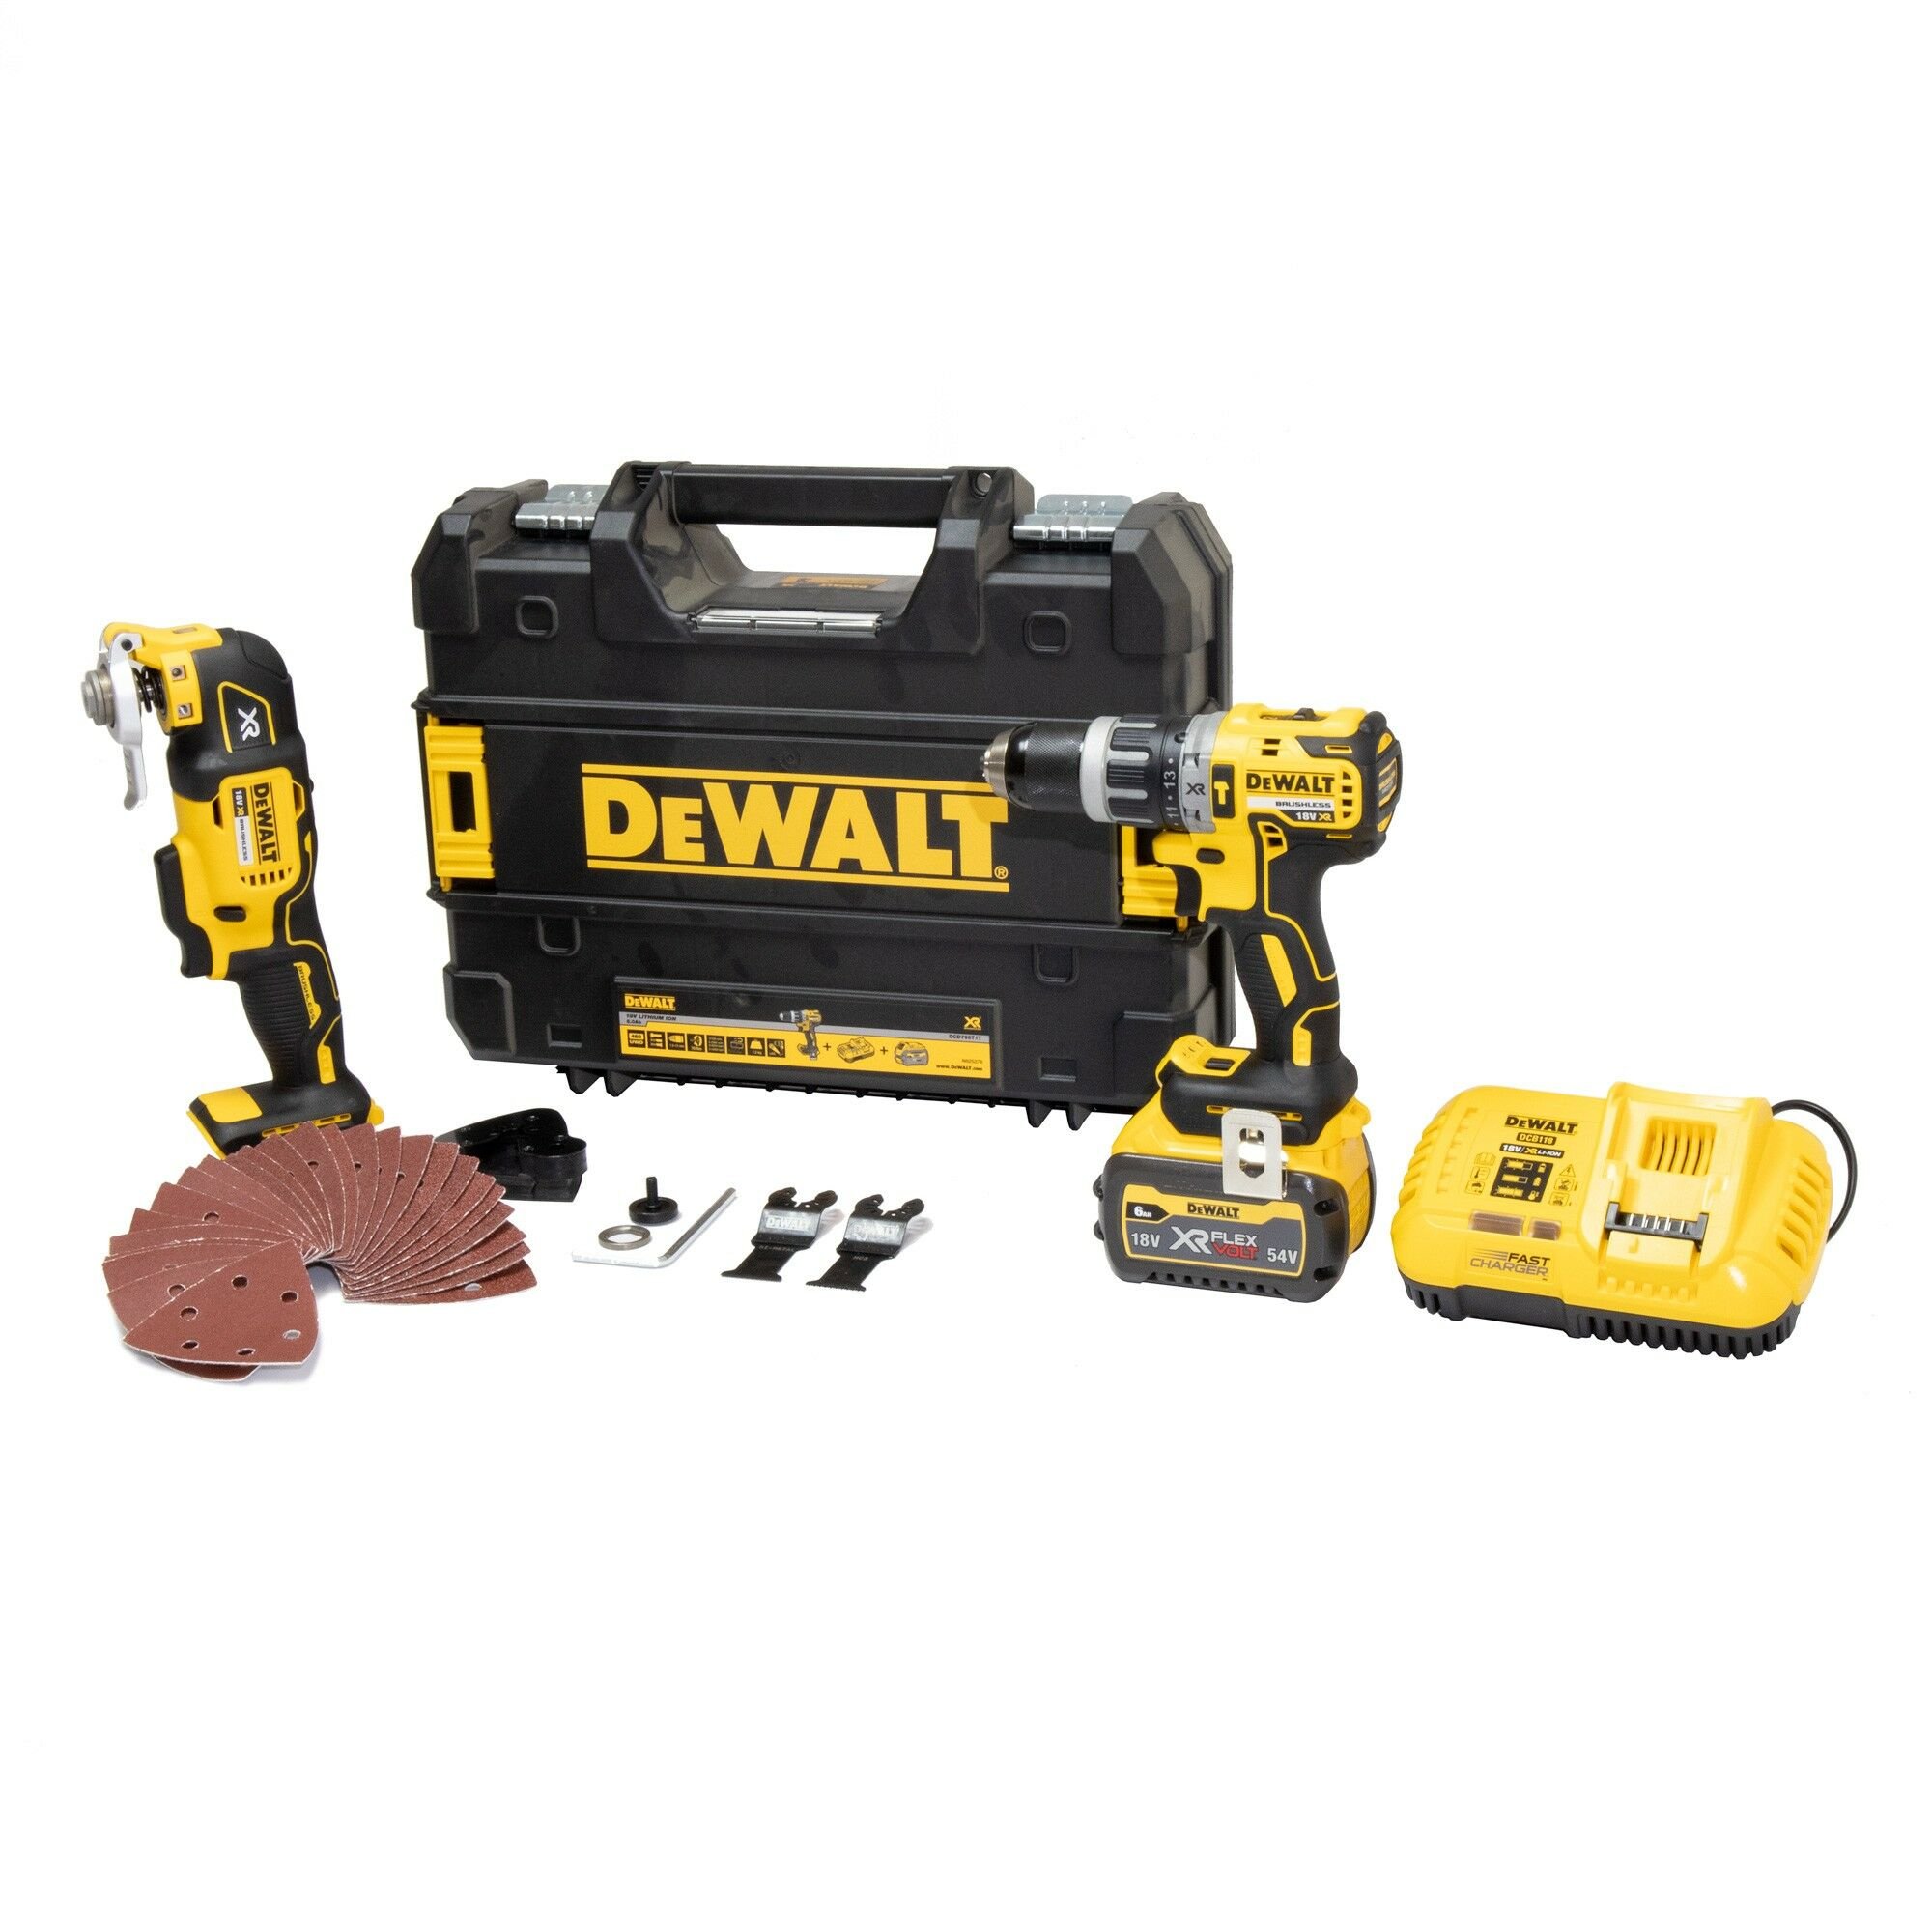 DeWalt DCD796T1T-K3 18V Combi Drill and Multi-Tool Kit - 6Ah Battery, Charger and Case